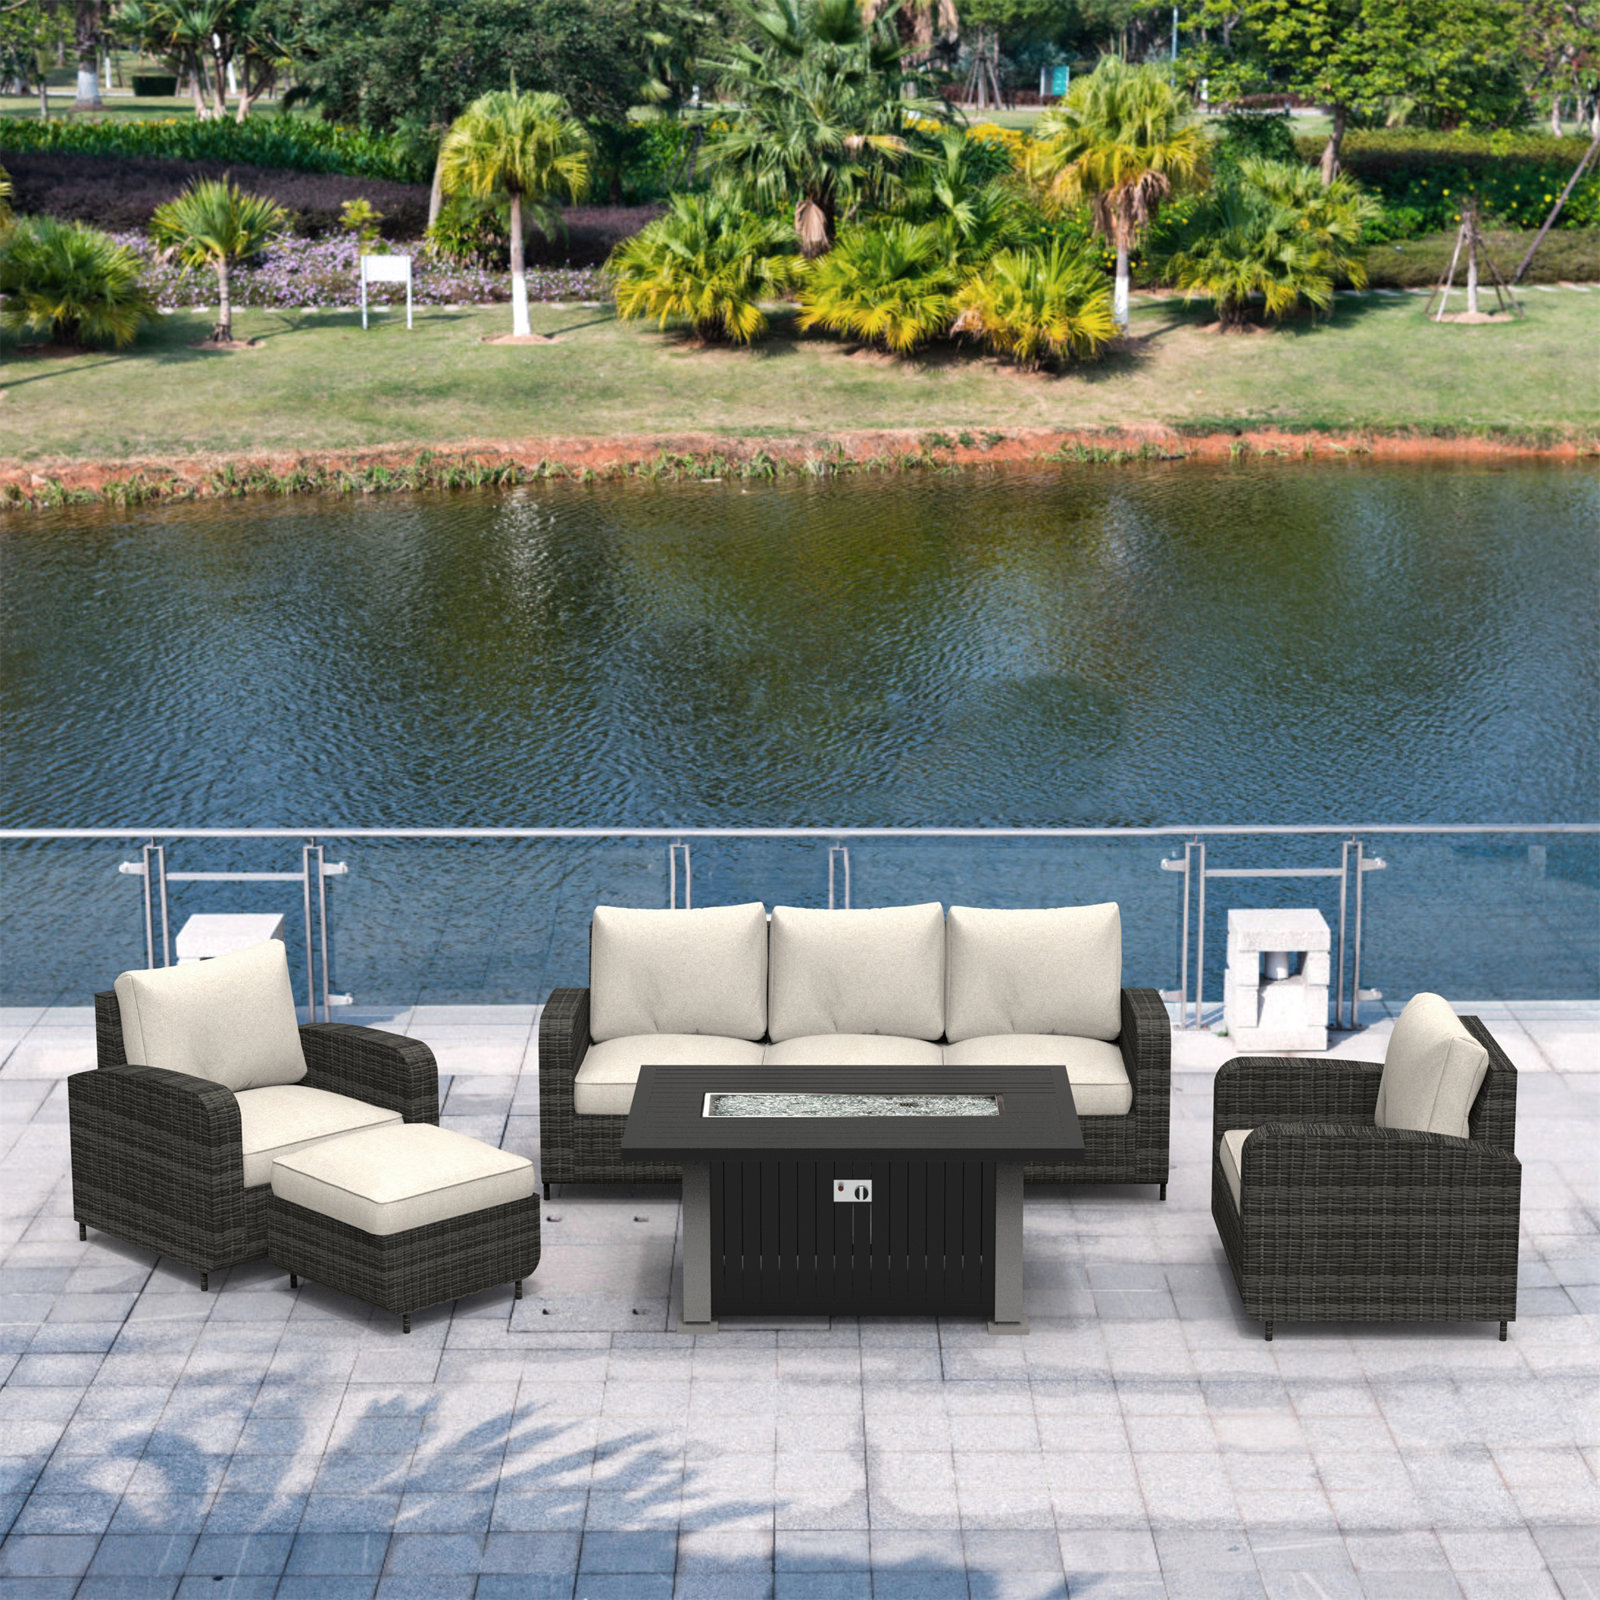 DirectWicker Polyethylene (PE) Wicker 6 - Person Seating Group with Cushions